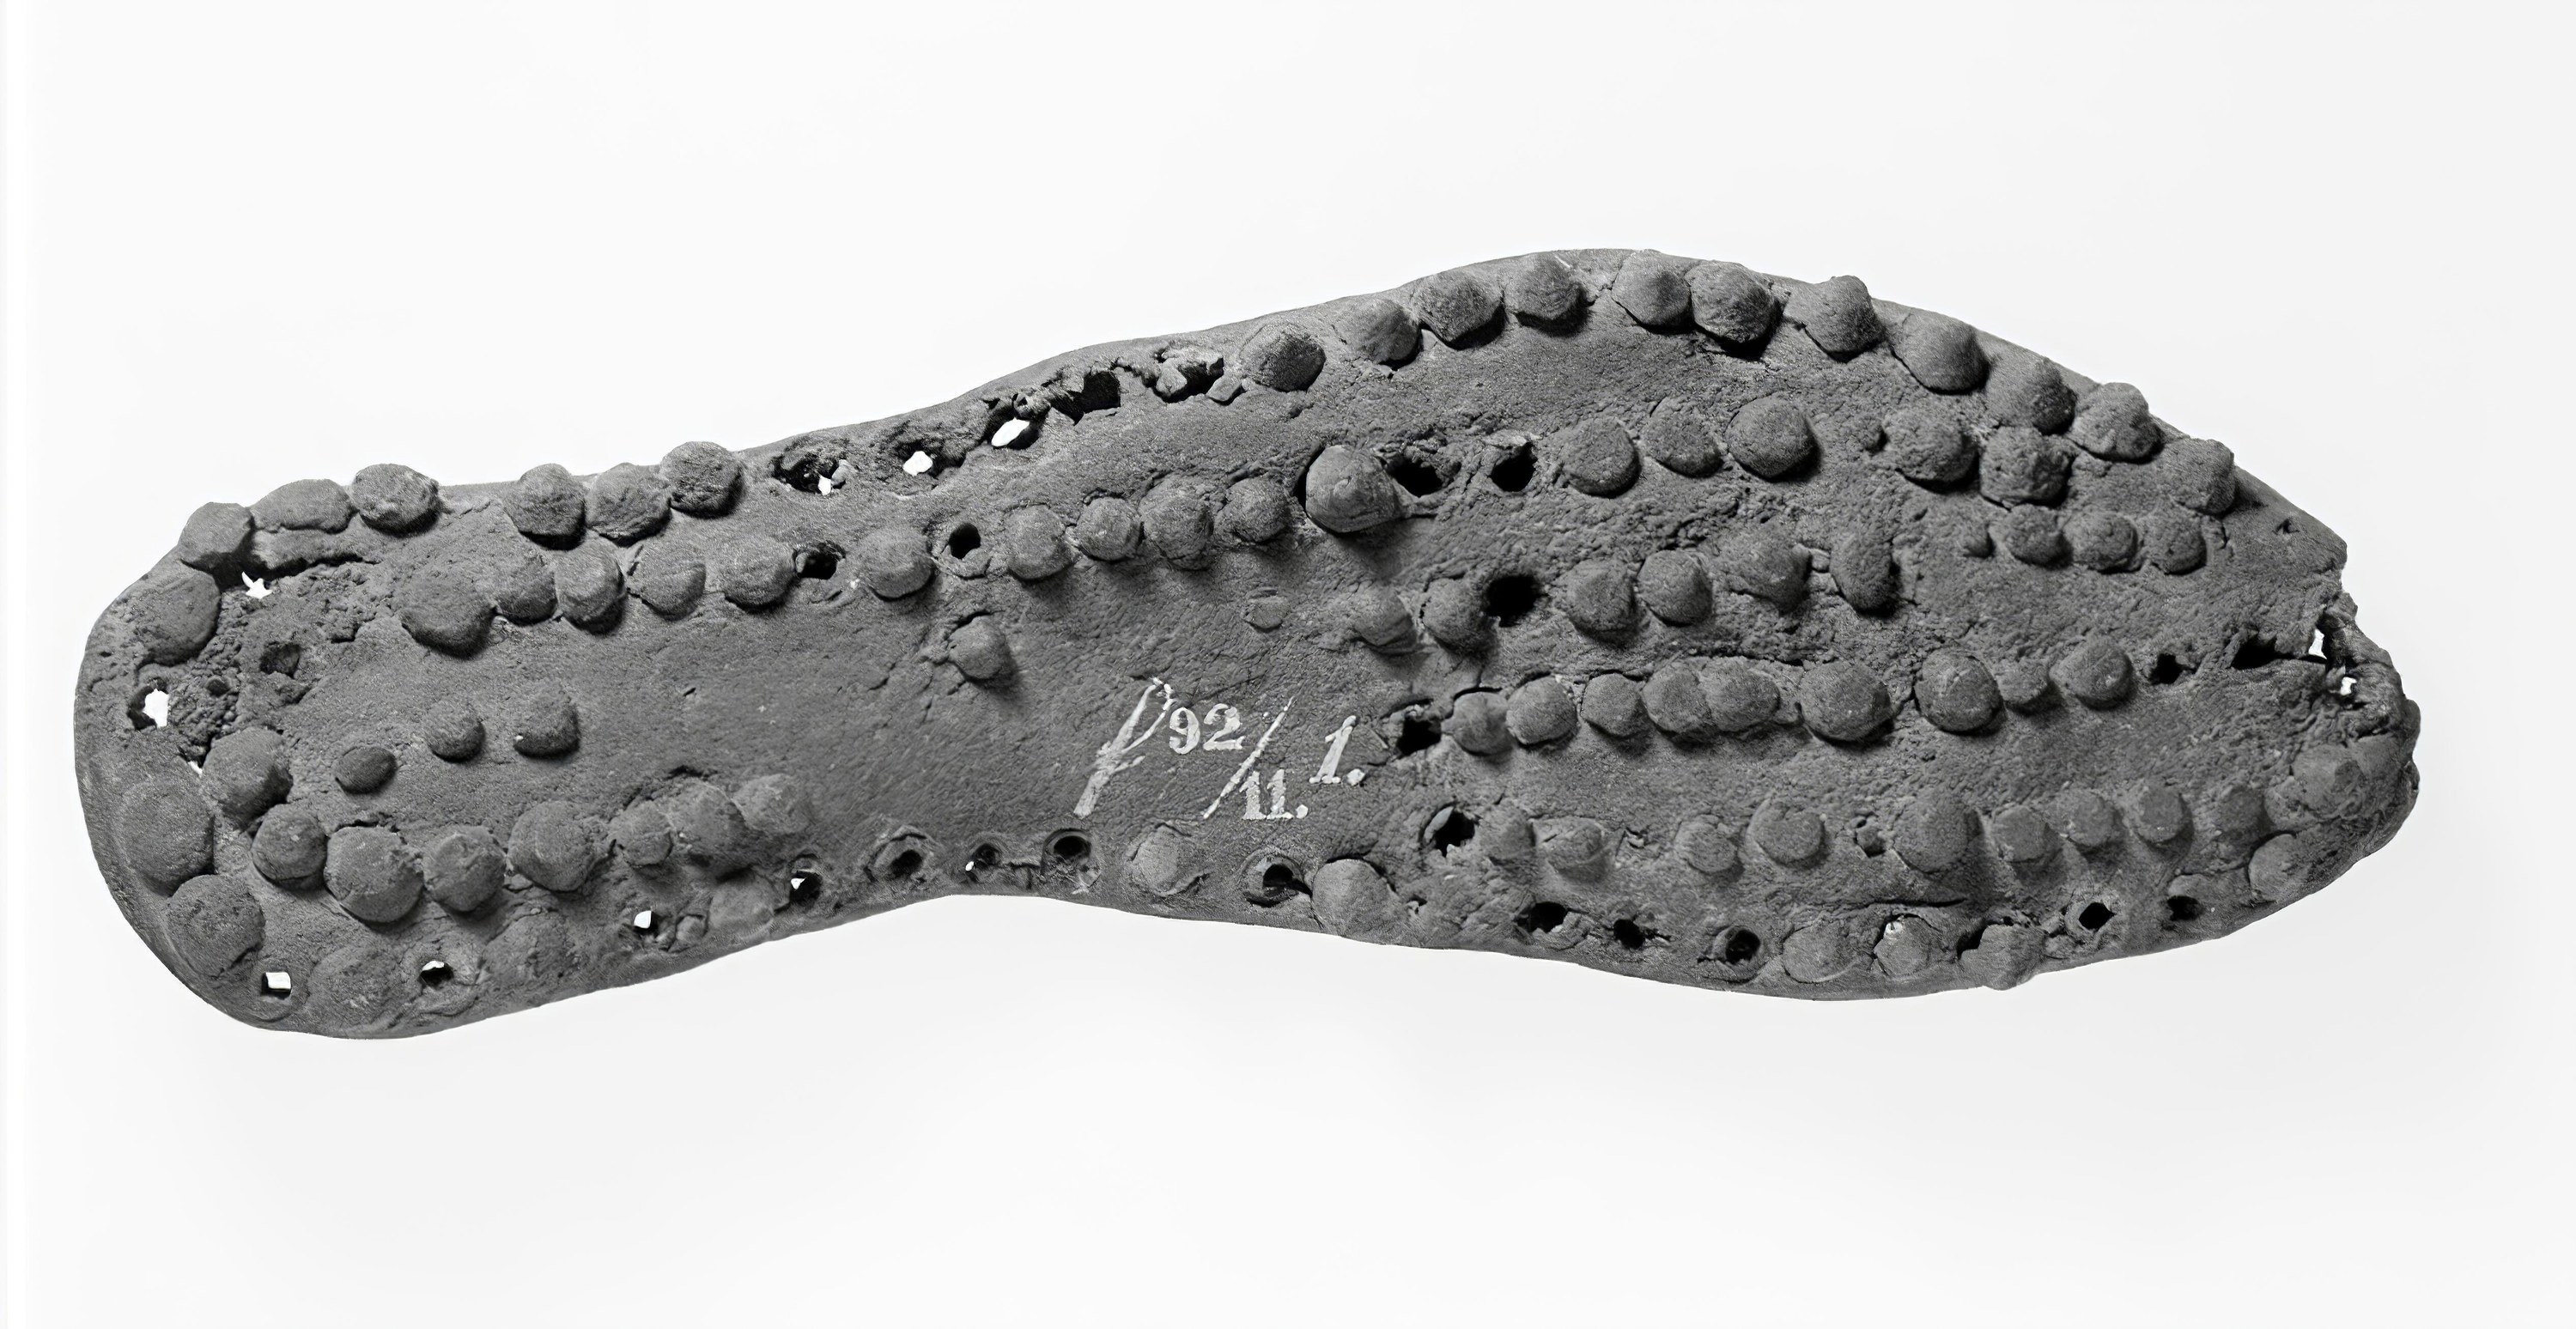 A soft-looking sole with many small raised bumps